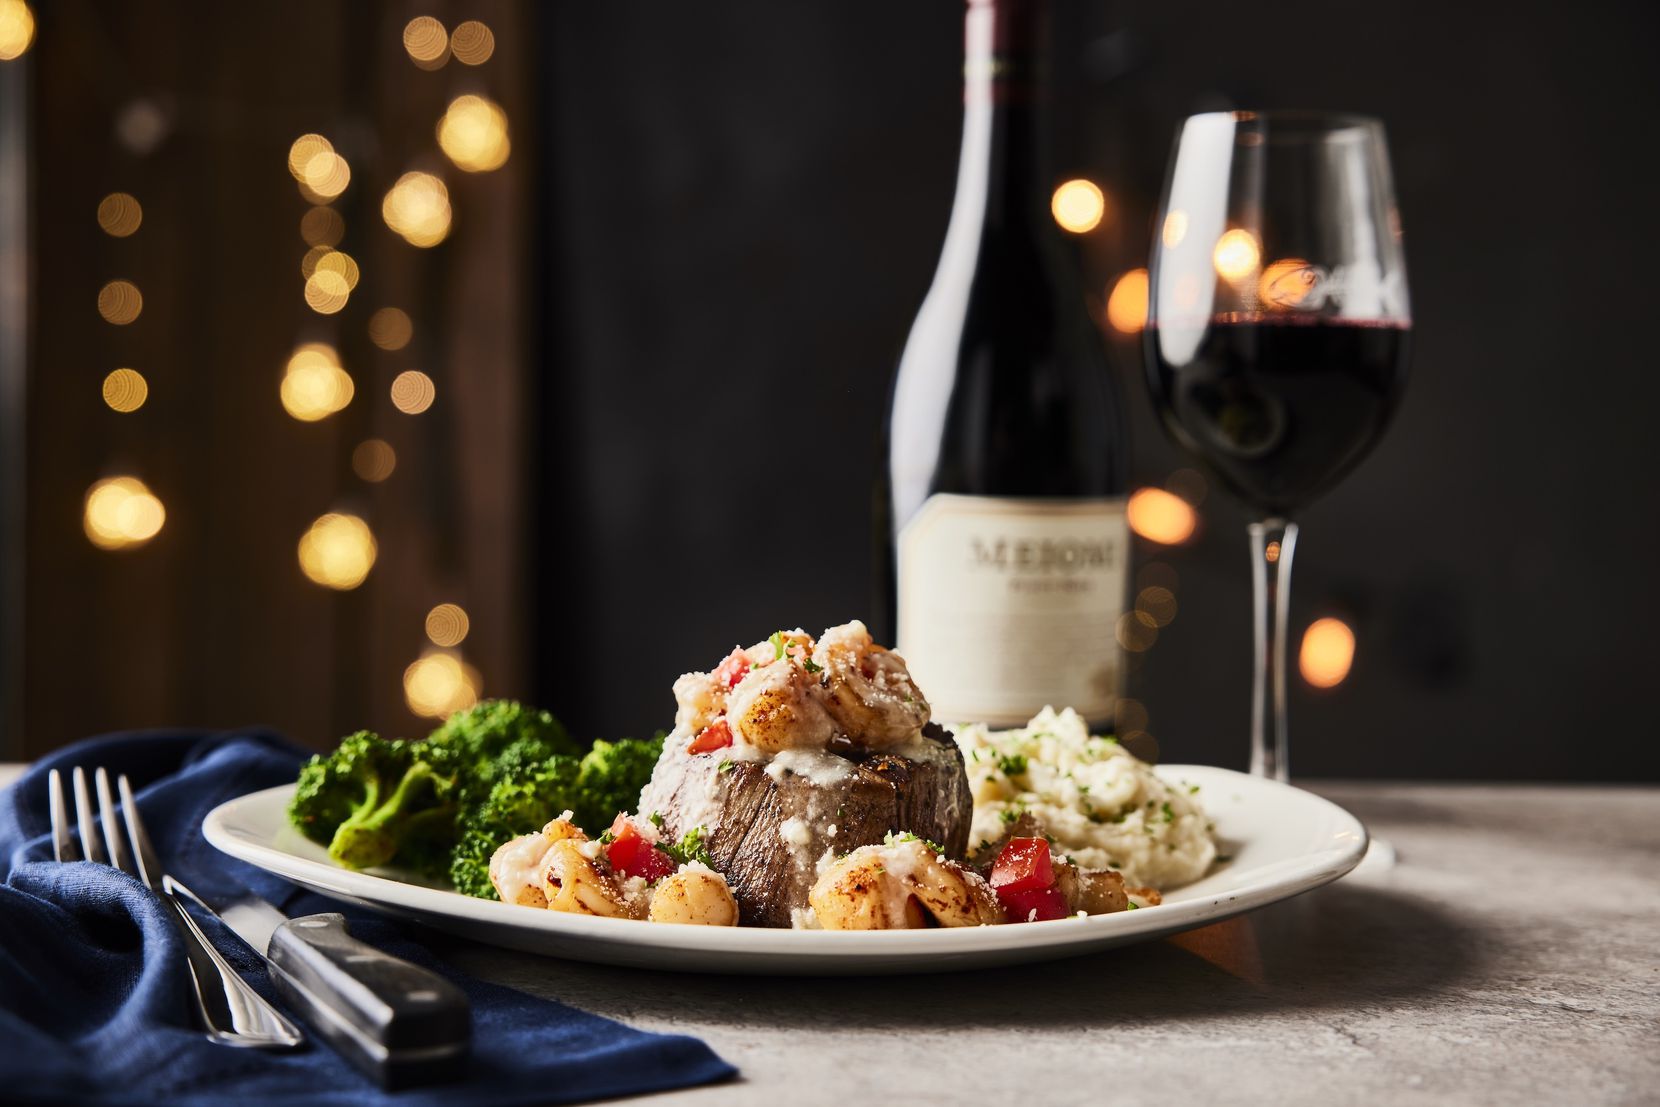 Bonefish Grill is serving a Valentine's special featuring 7-ounce wood-grilled filet mignon,...